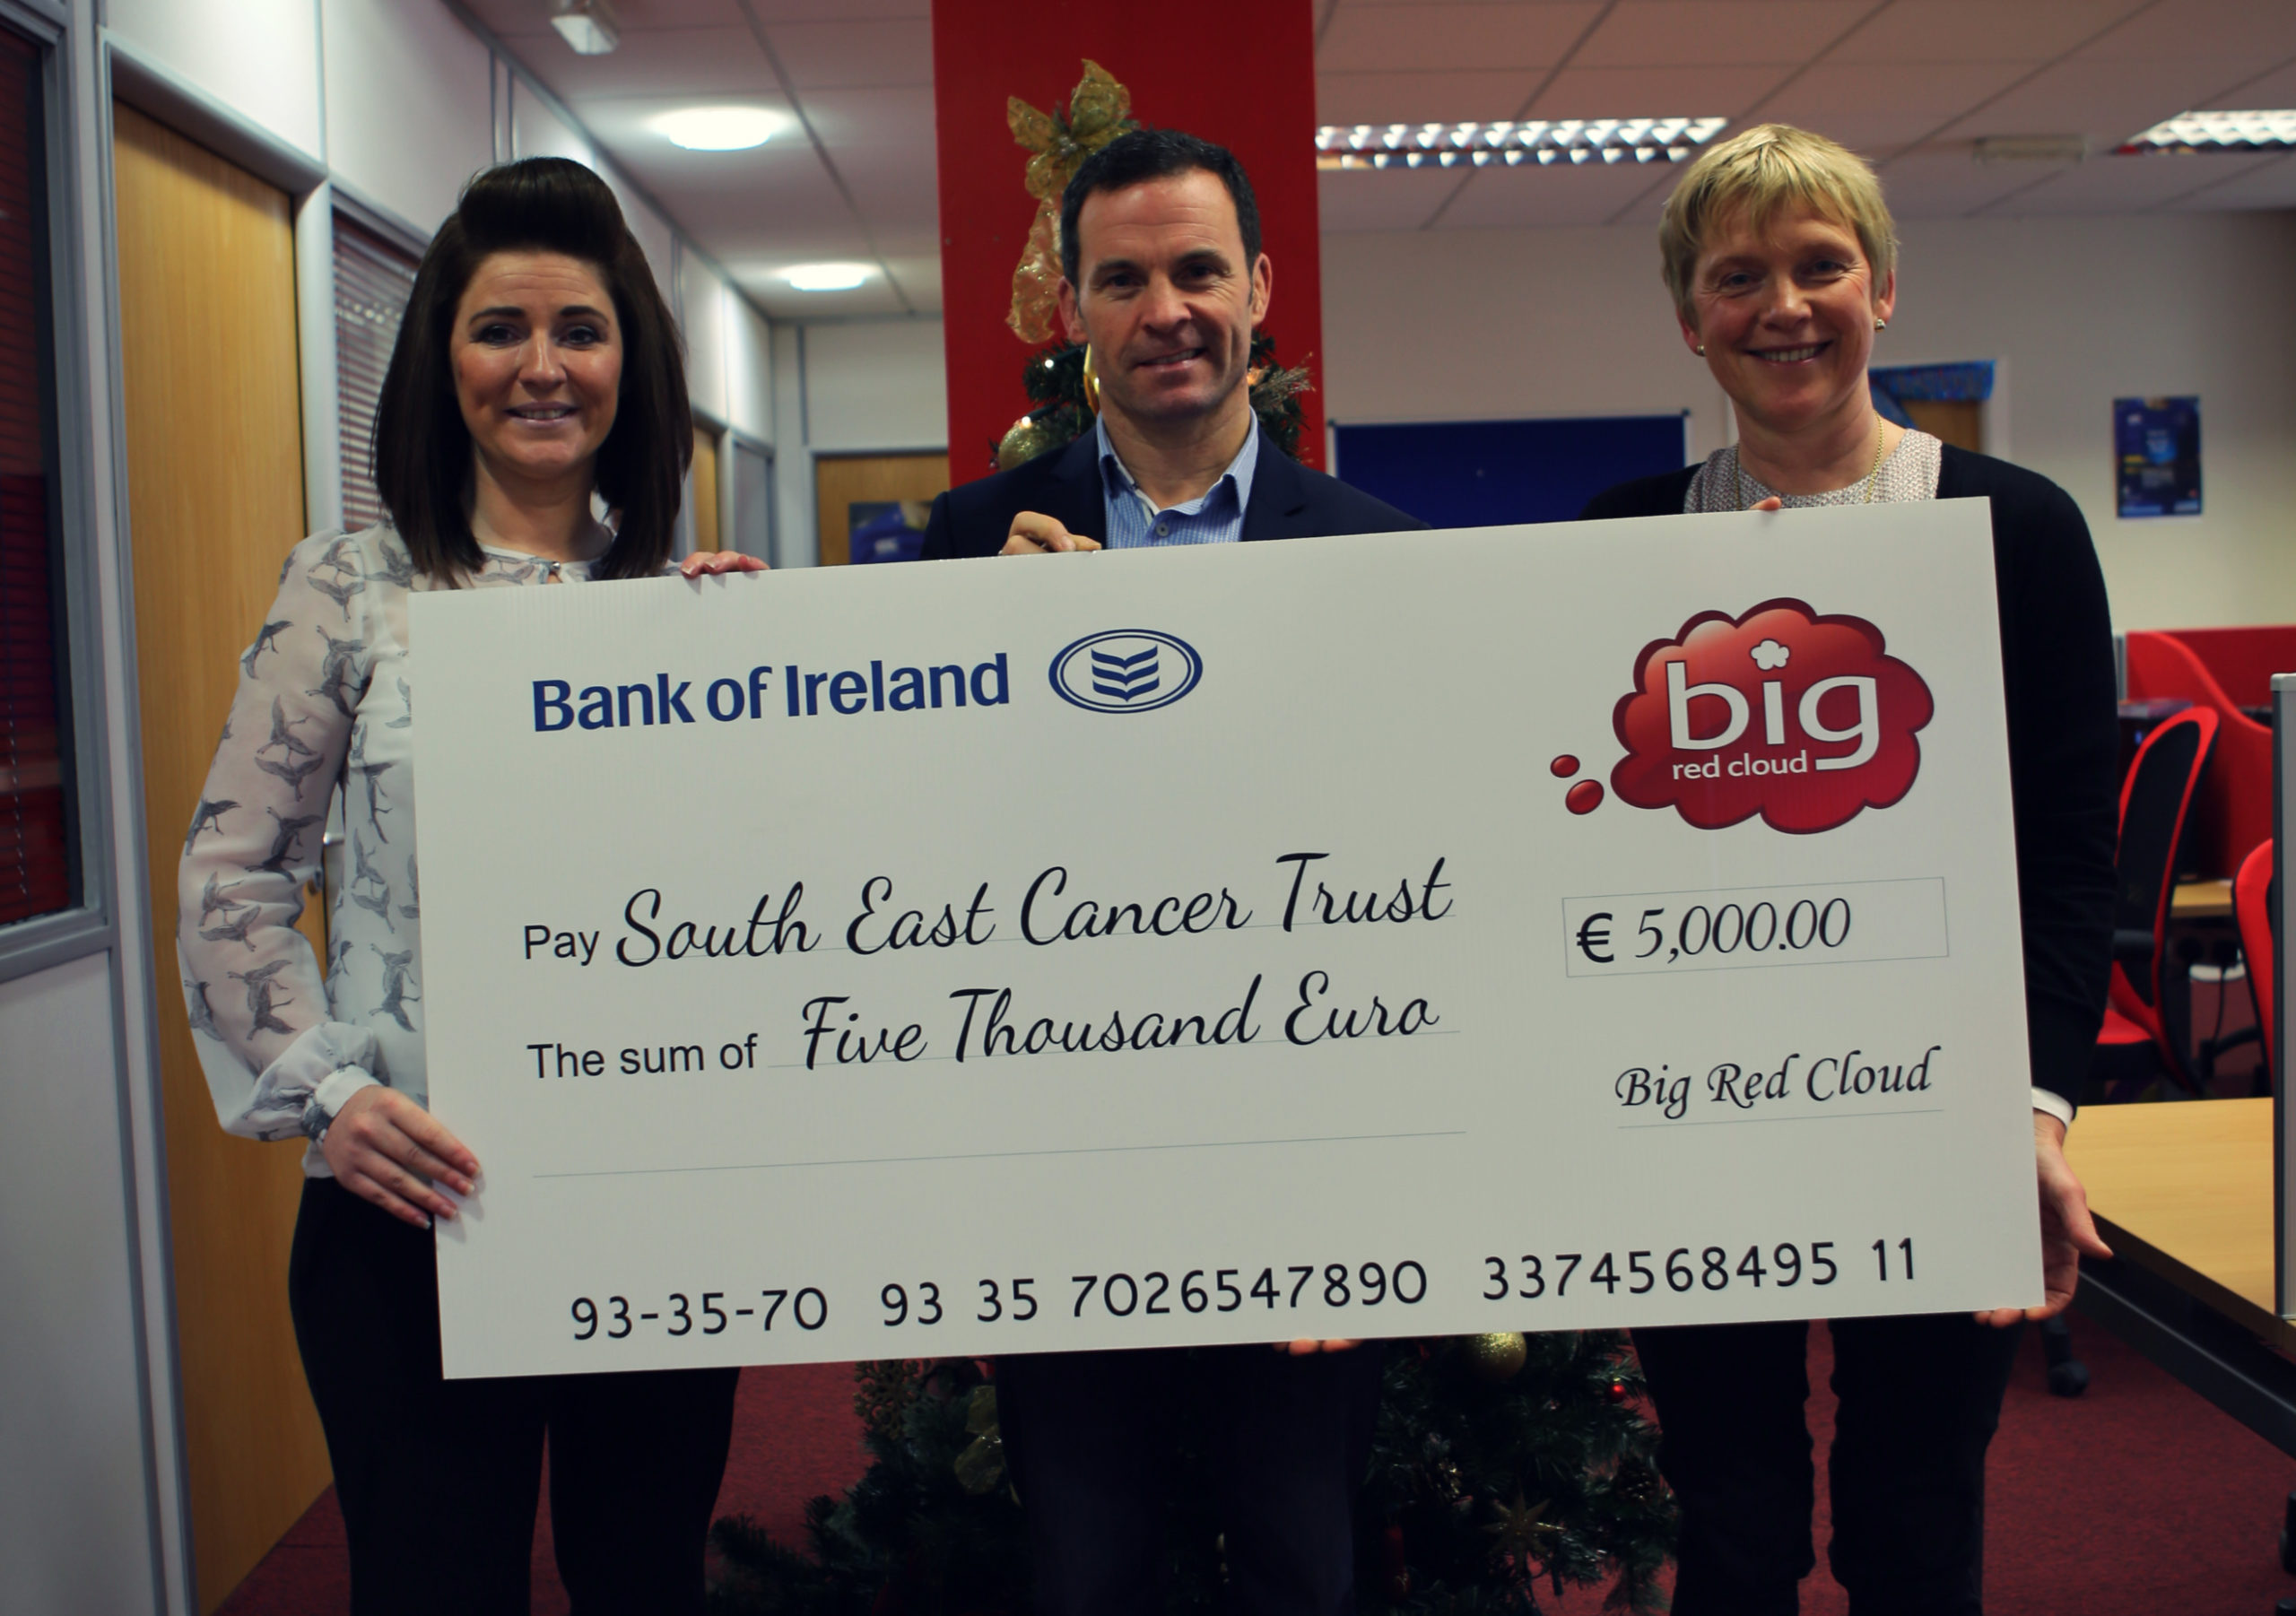 South East Cancer Trust Wins Big Red Cloud’s €5,000 Sponsor for a Day Charity Prize